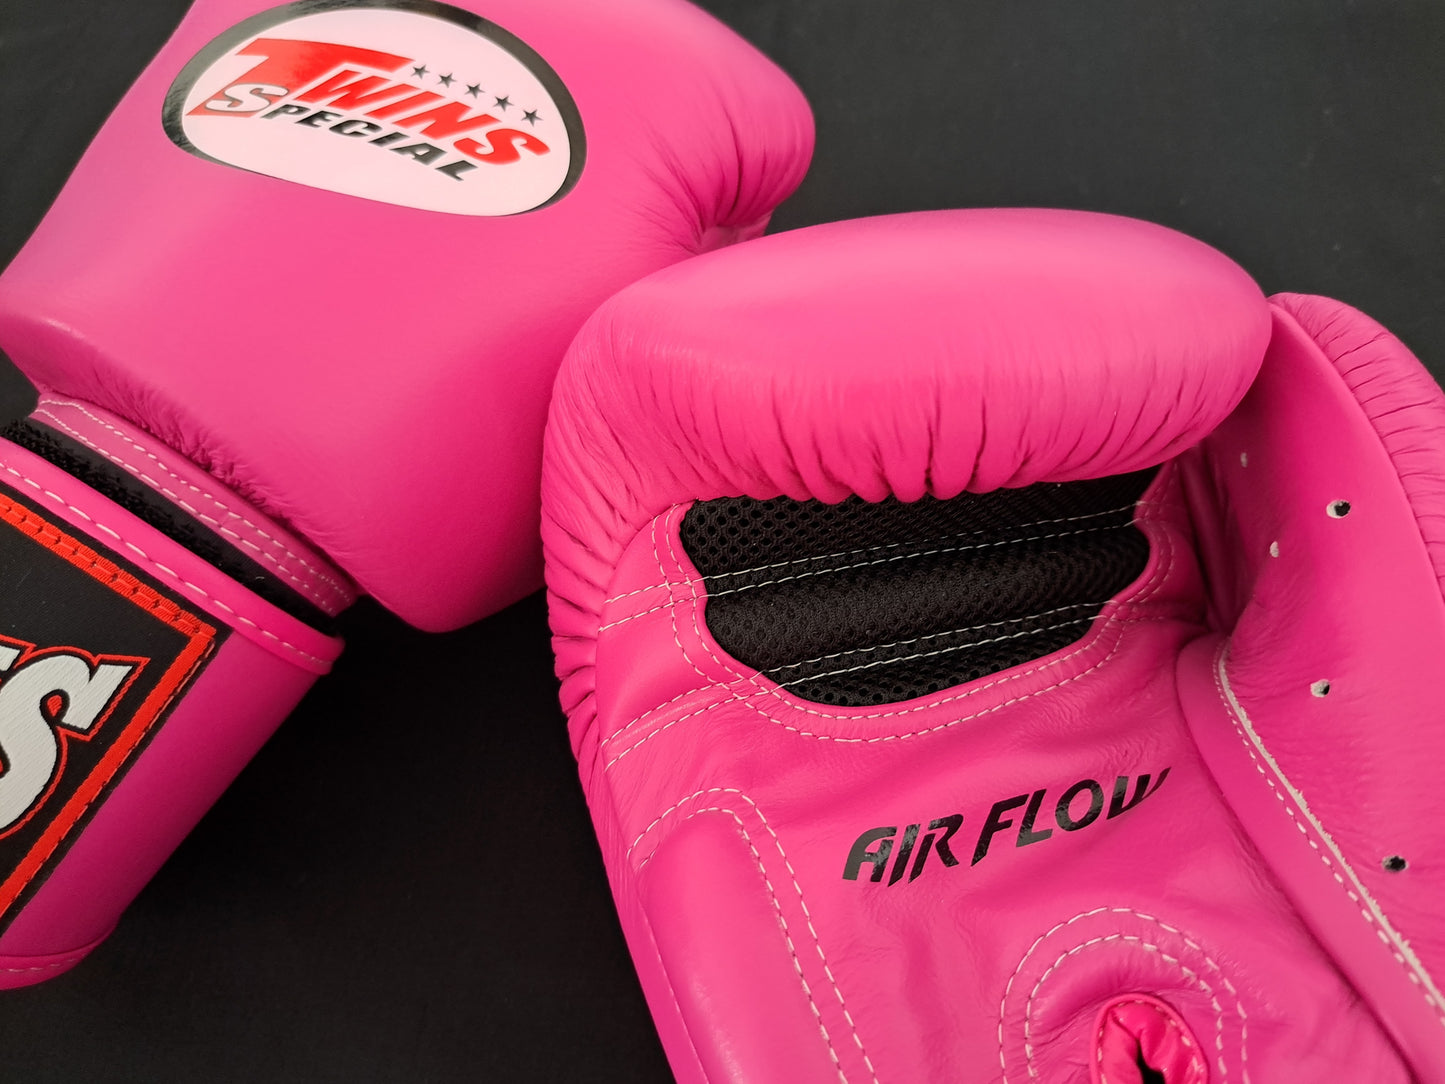 Twins Special Thai Boxing Gloves - BGVL-3 - Pink - Air Flow